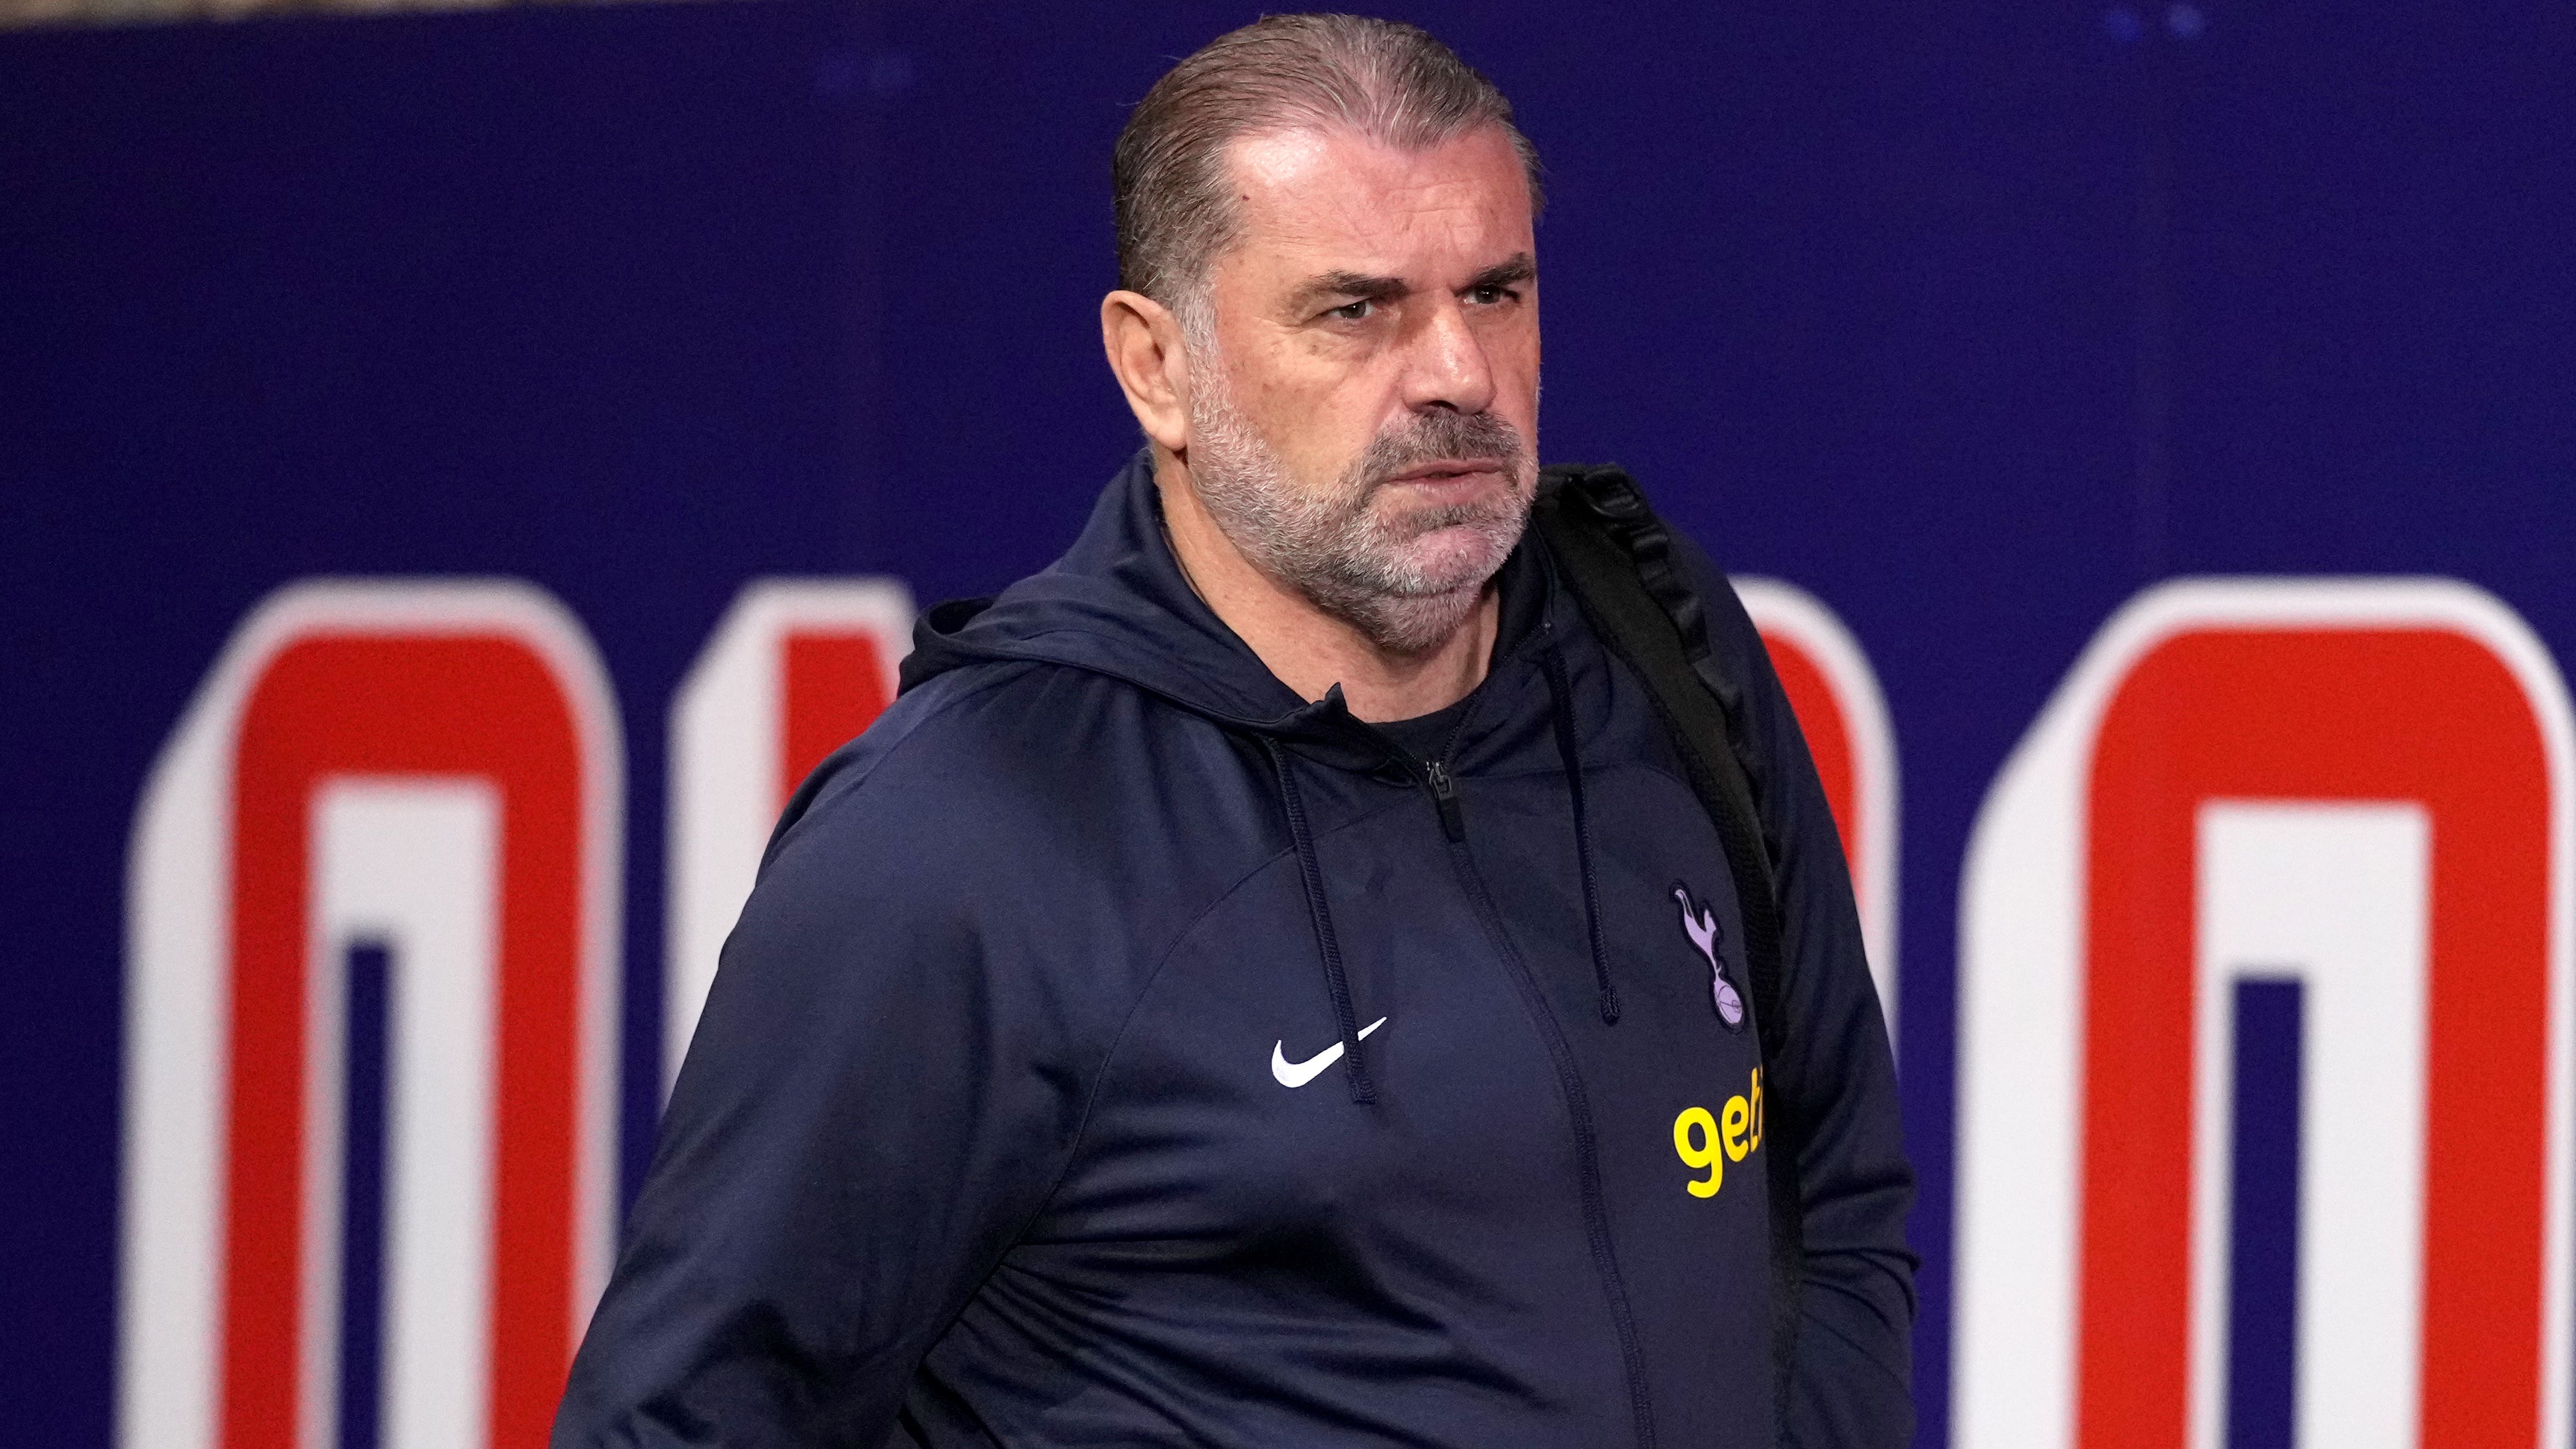 Spurs boss Ange Postecoglou knows money is not everything ahead of Chelsea game